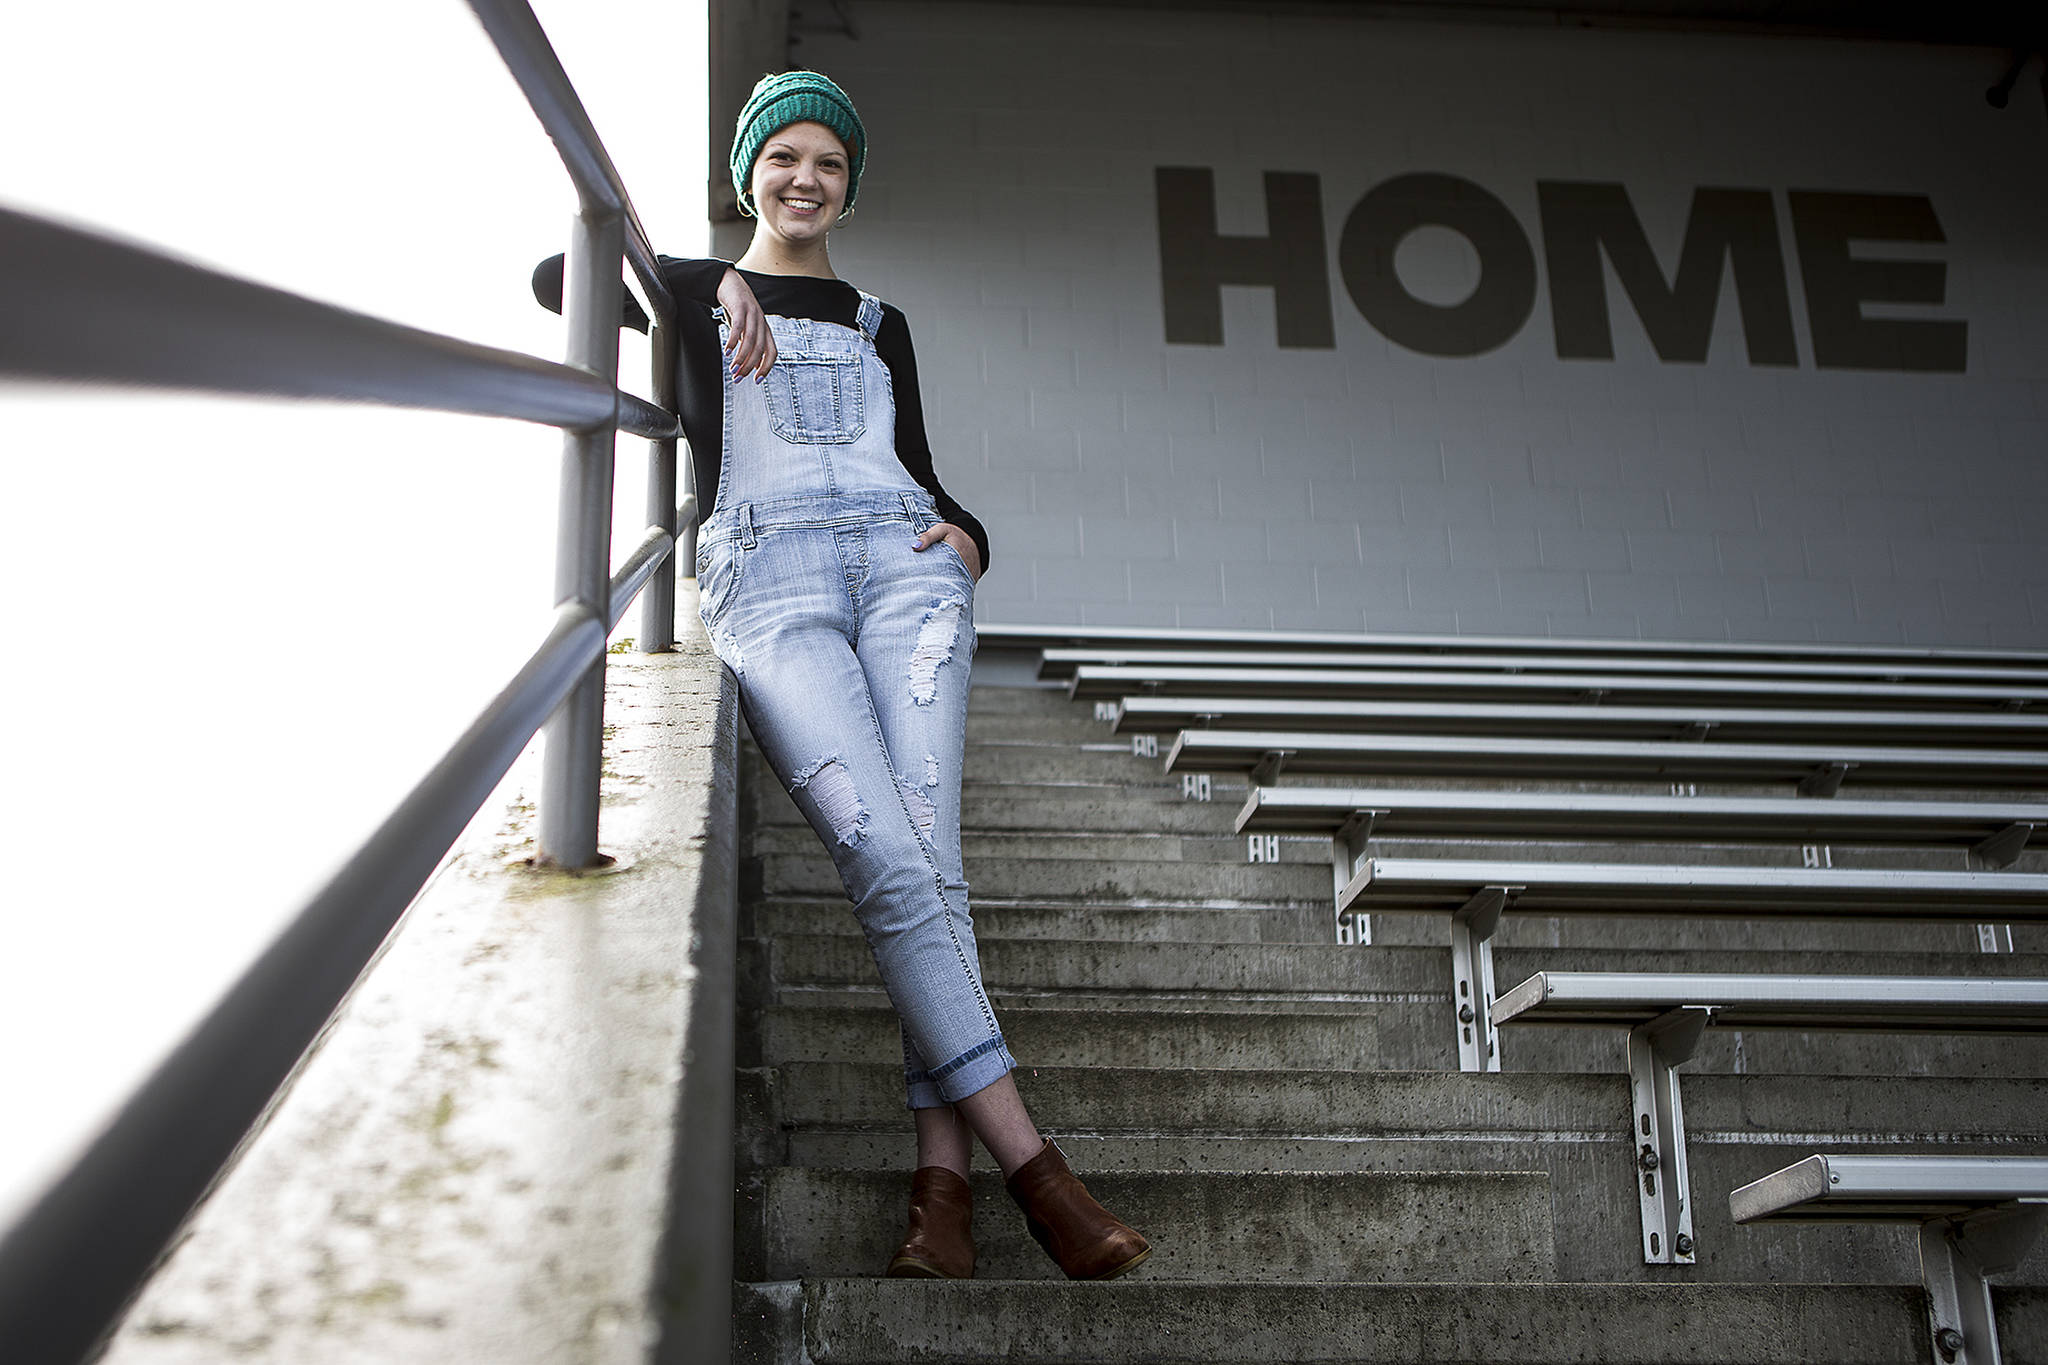 Emma Lande has been involved with everything from cheerleading, softball, ASB, leadership and most recently, theater, throughout her time at Snohomish High School. Lande, a senior, is currently battling Hodgkins lymphoma and is about halfway through her treatment. (Ian Terry / The Herald)